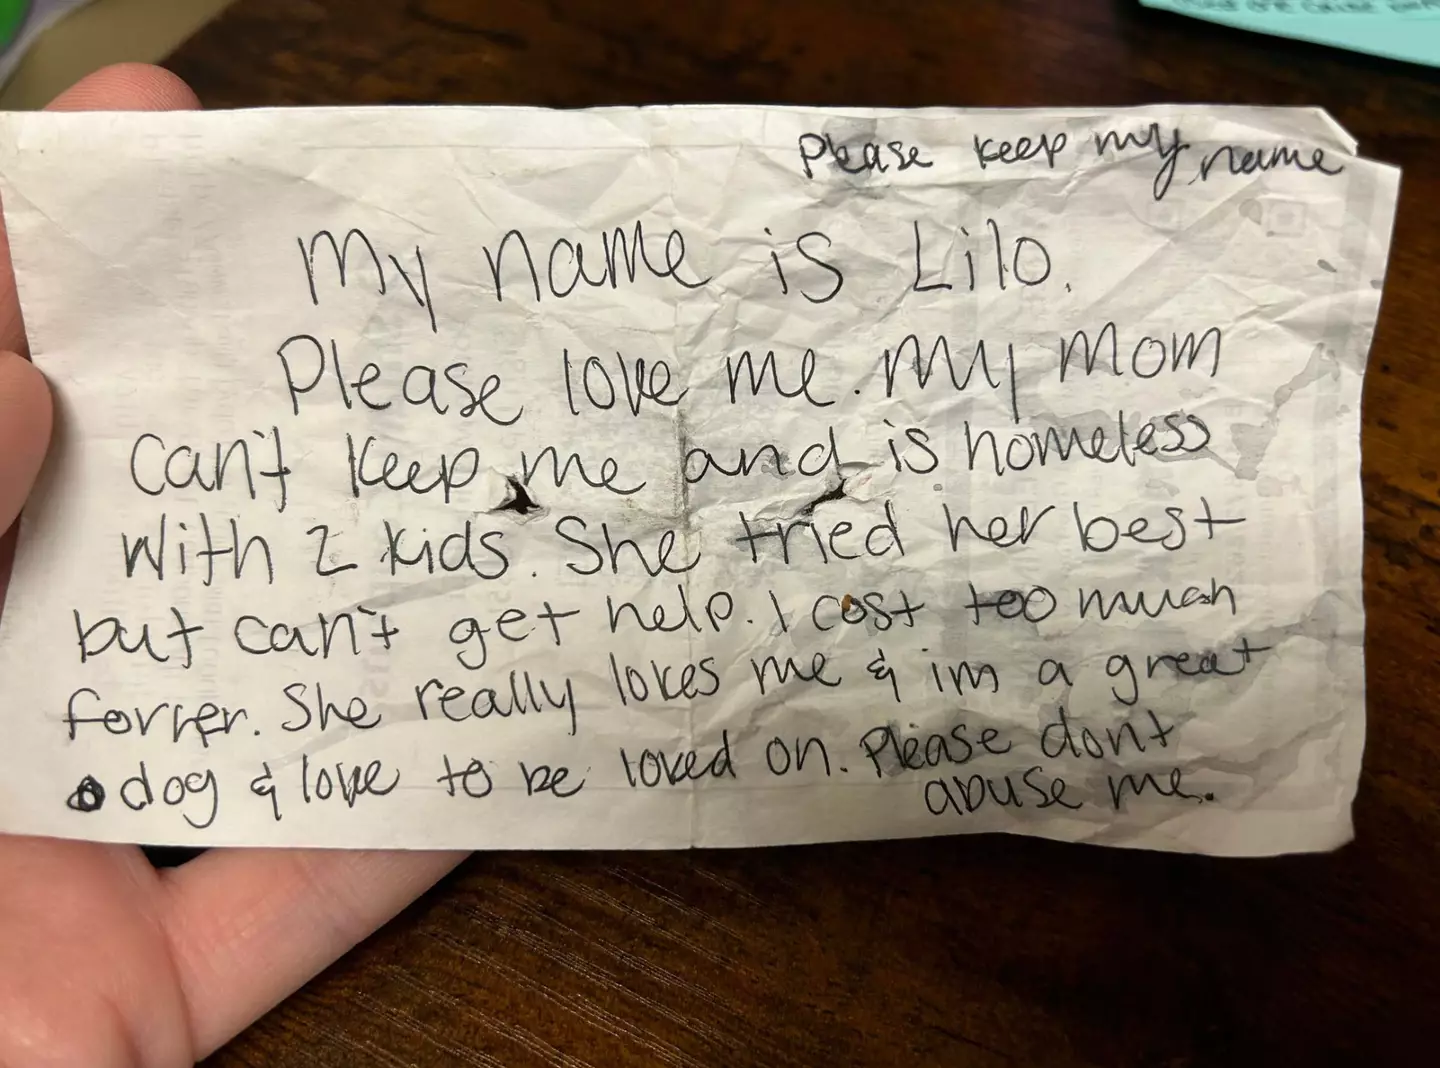 Lilo's owner wanted her to keep her name.